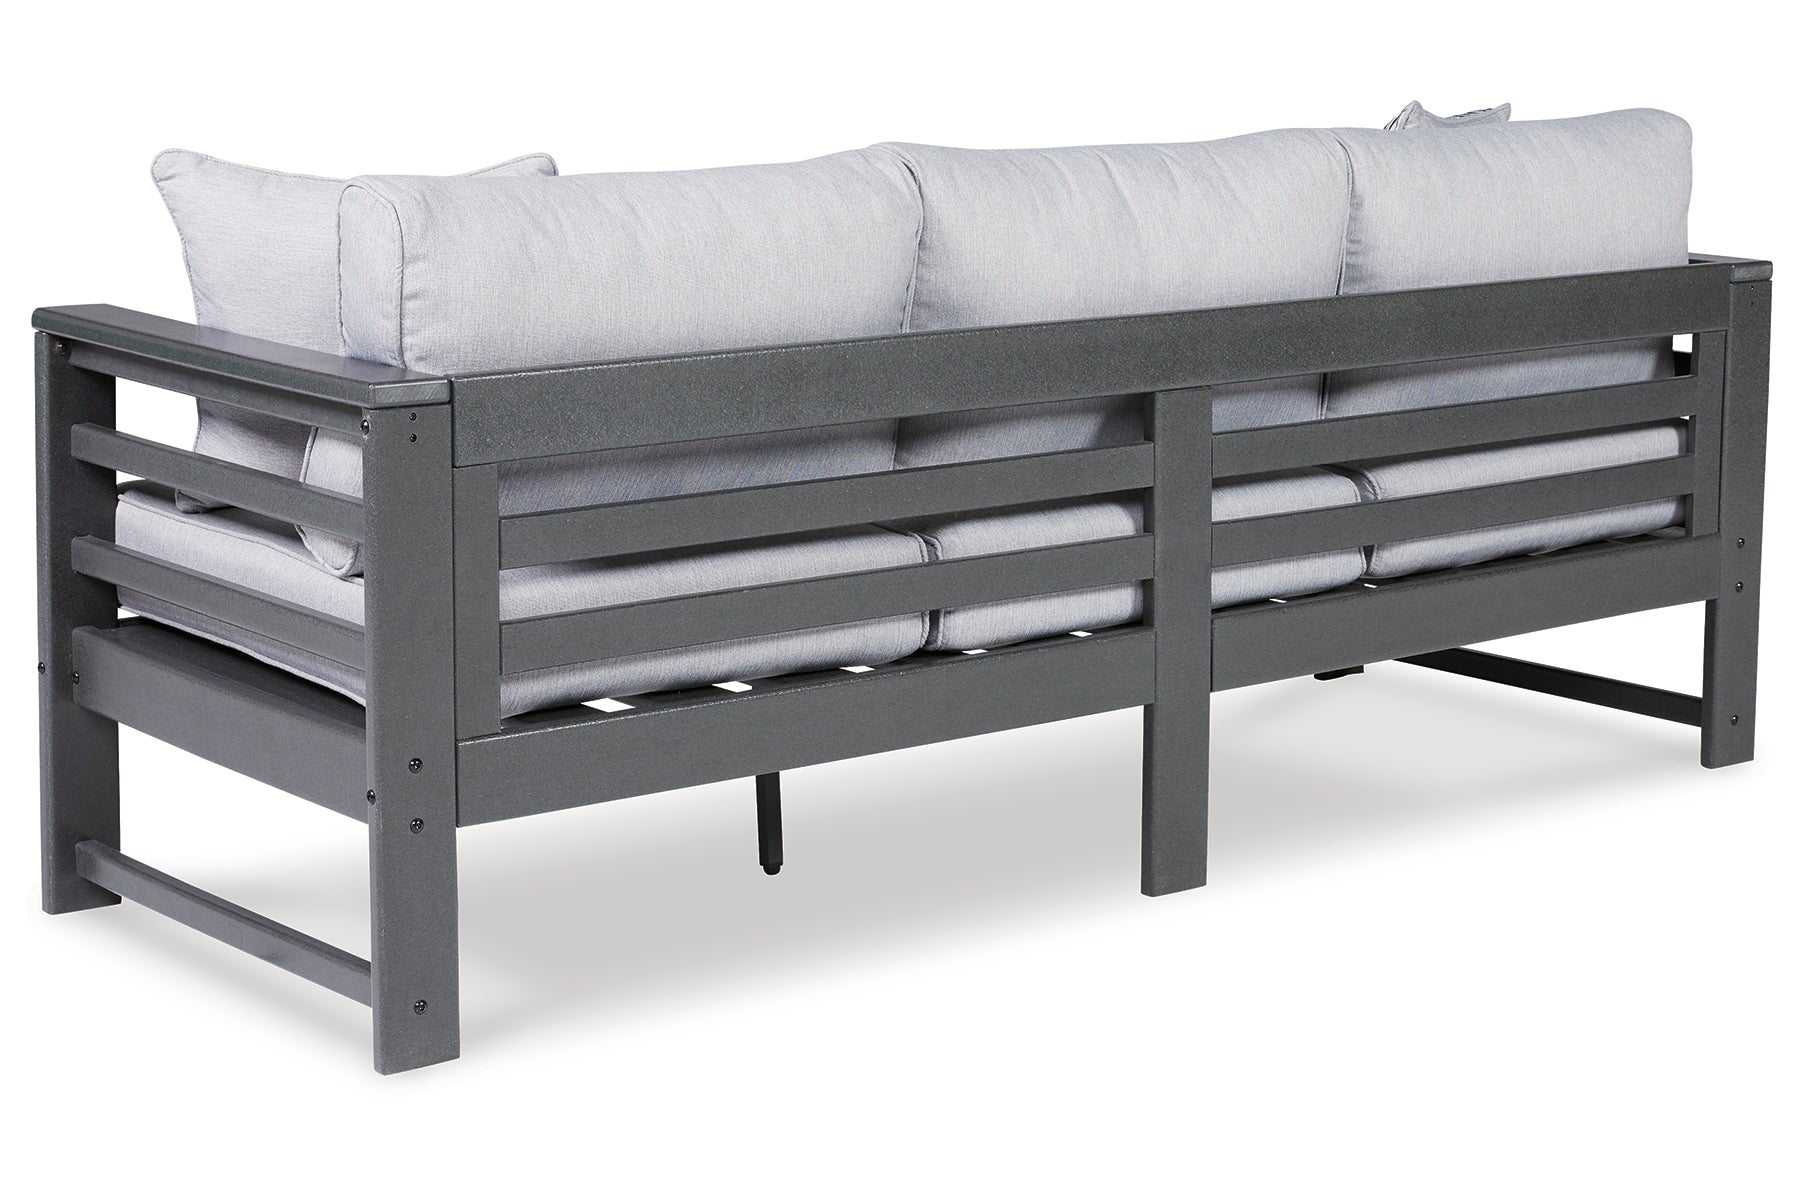 Amora Outdoor Sofa with Coffee Table